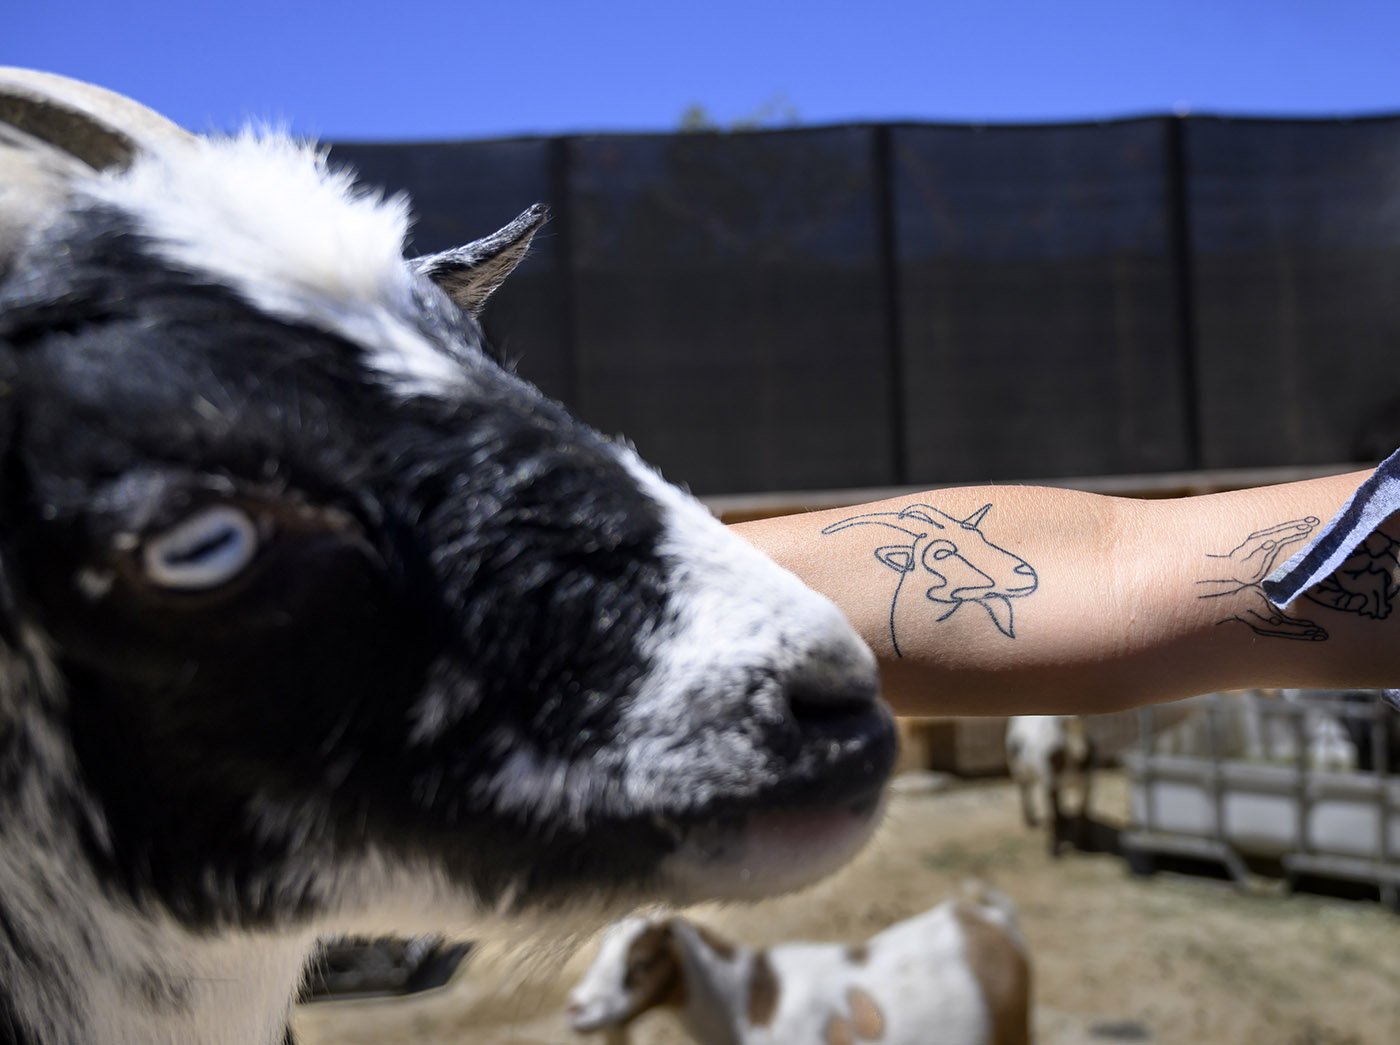  Goods and Goats Market Farm Manager Devyn Homan got a tattoo of her favorite goat, Yucca, pictured, because of his loving, dog-like behavior  